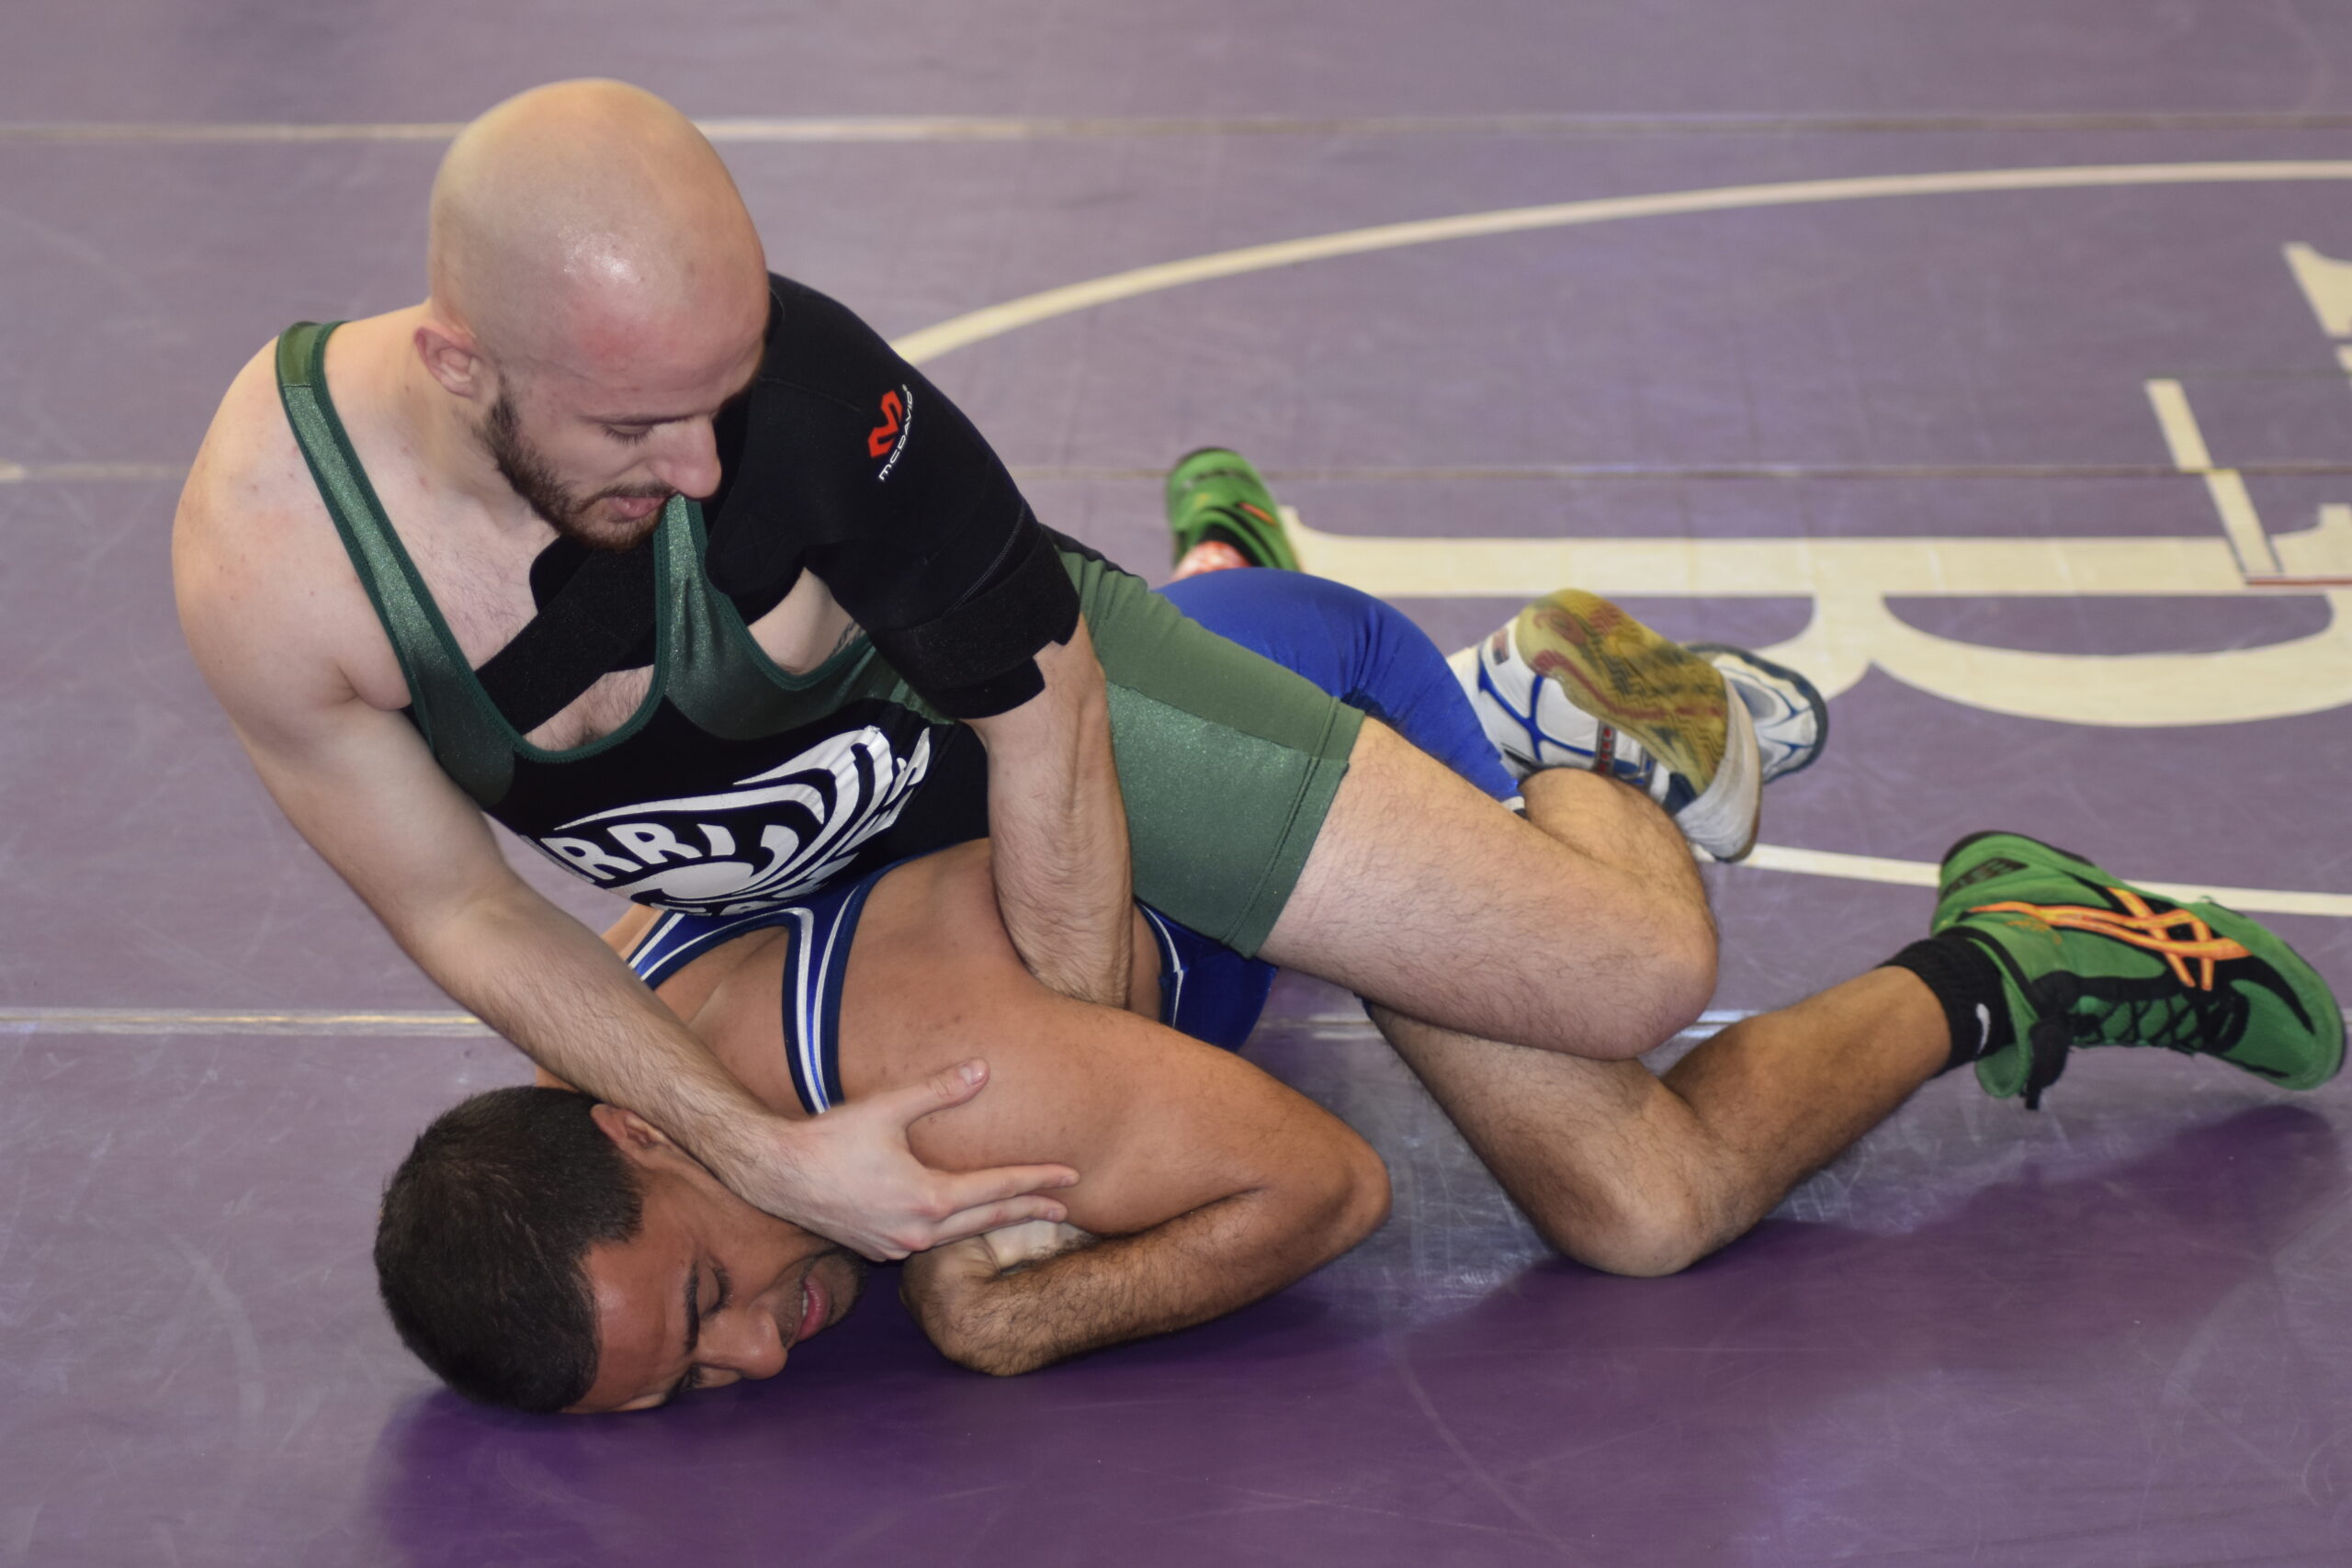 Westhampton Beach wrestling coach Andrew Petroulias also competed.   DREW BUDD